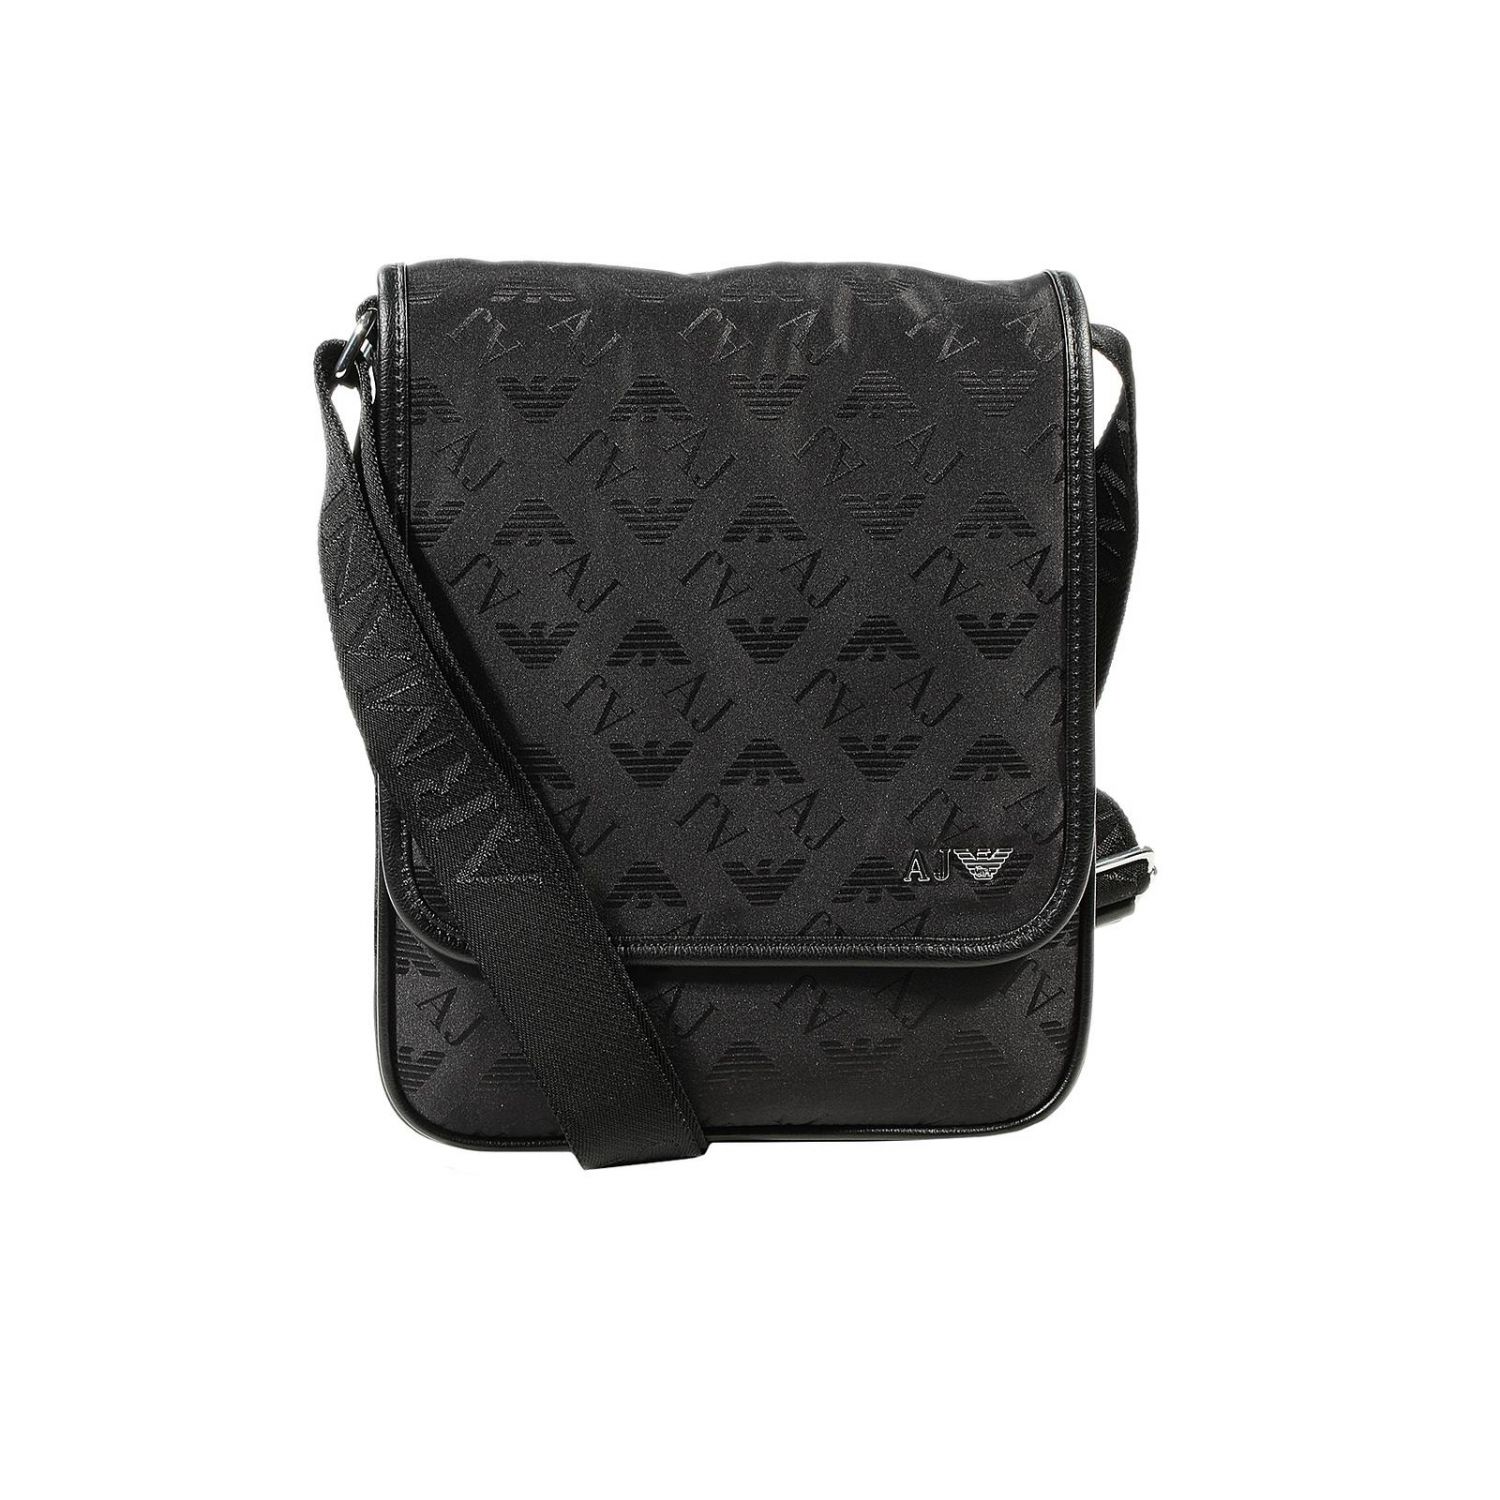 Armani Jeans Outlet: CROSSBODY WITH FLAP NYLON LOGO | Bags Armani Jeans ...